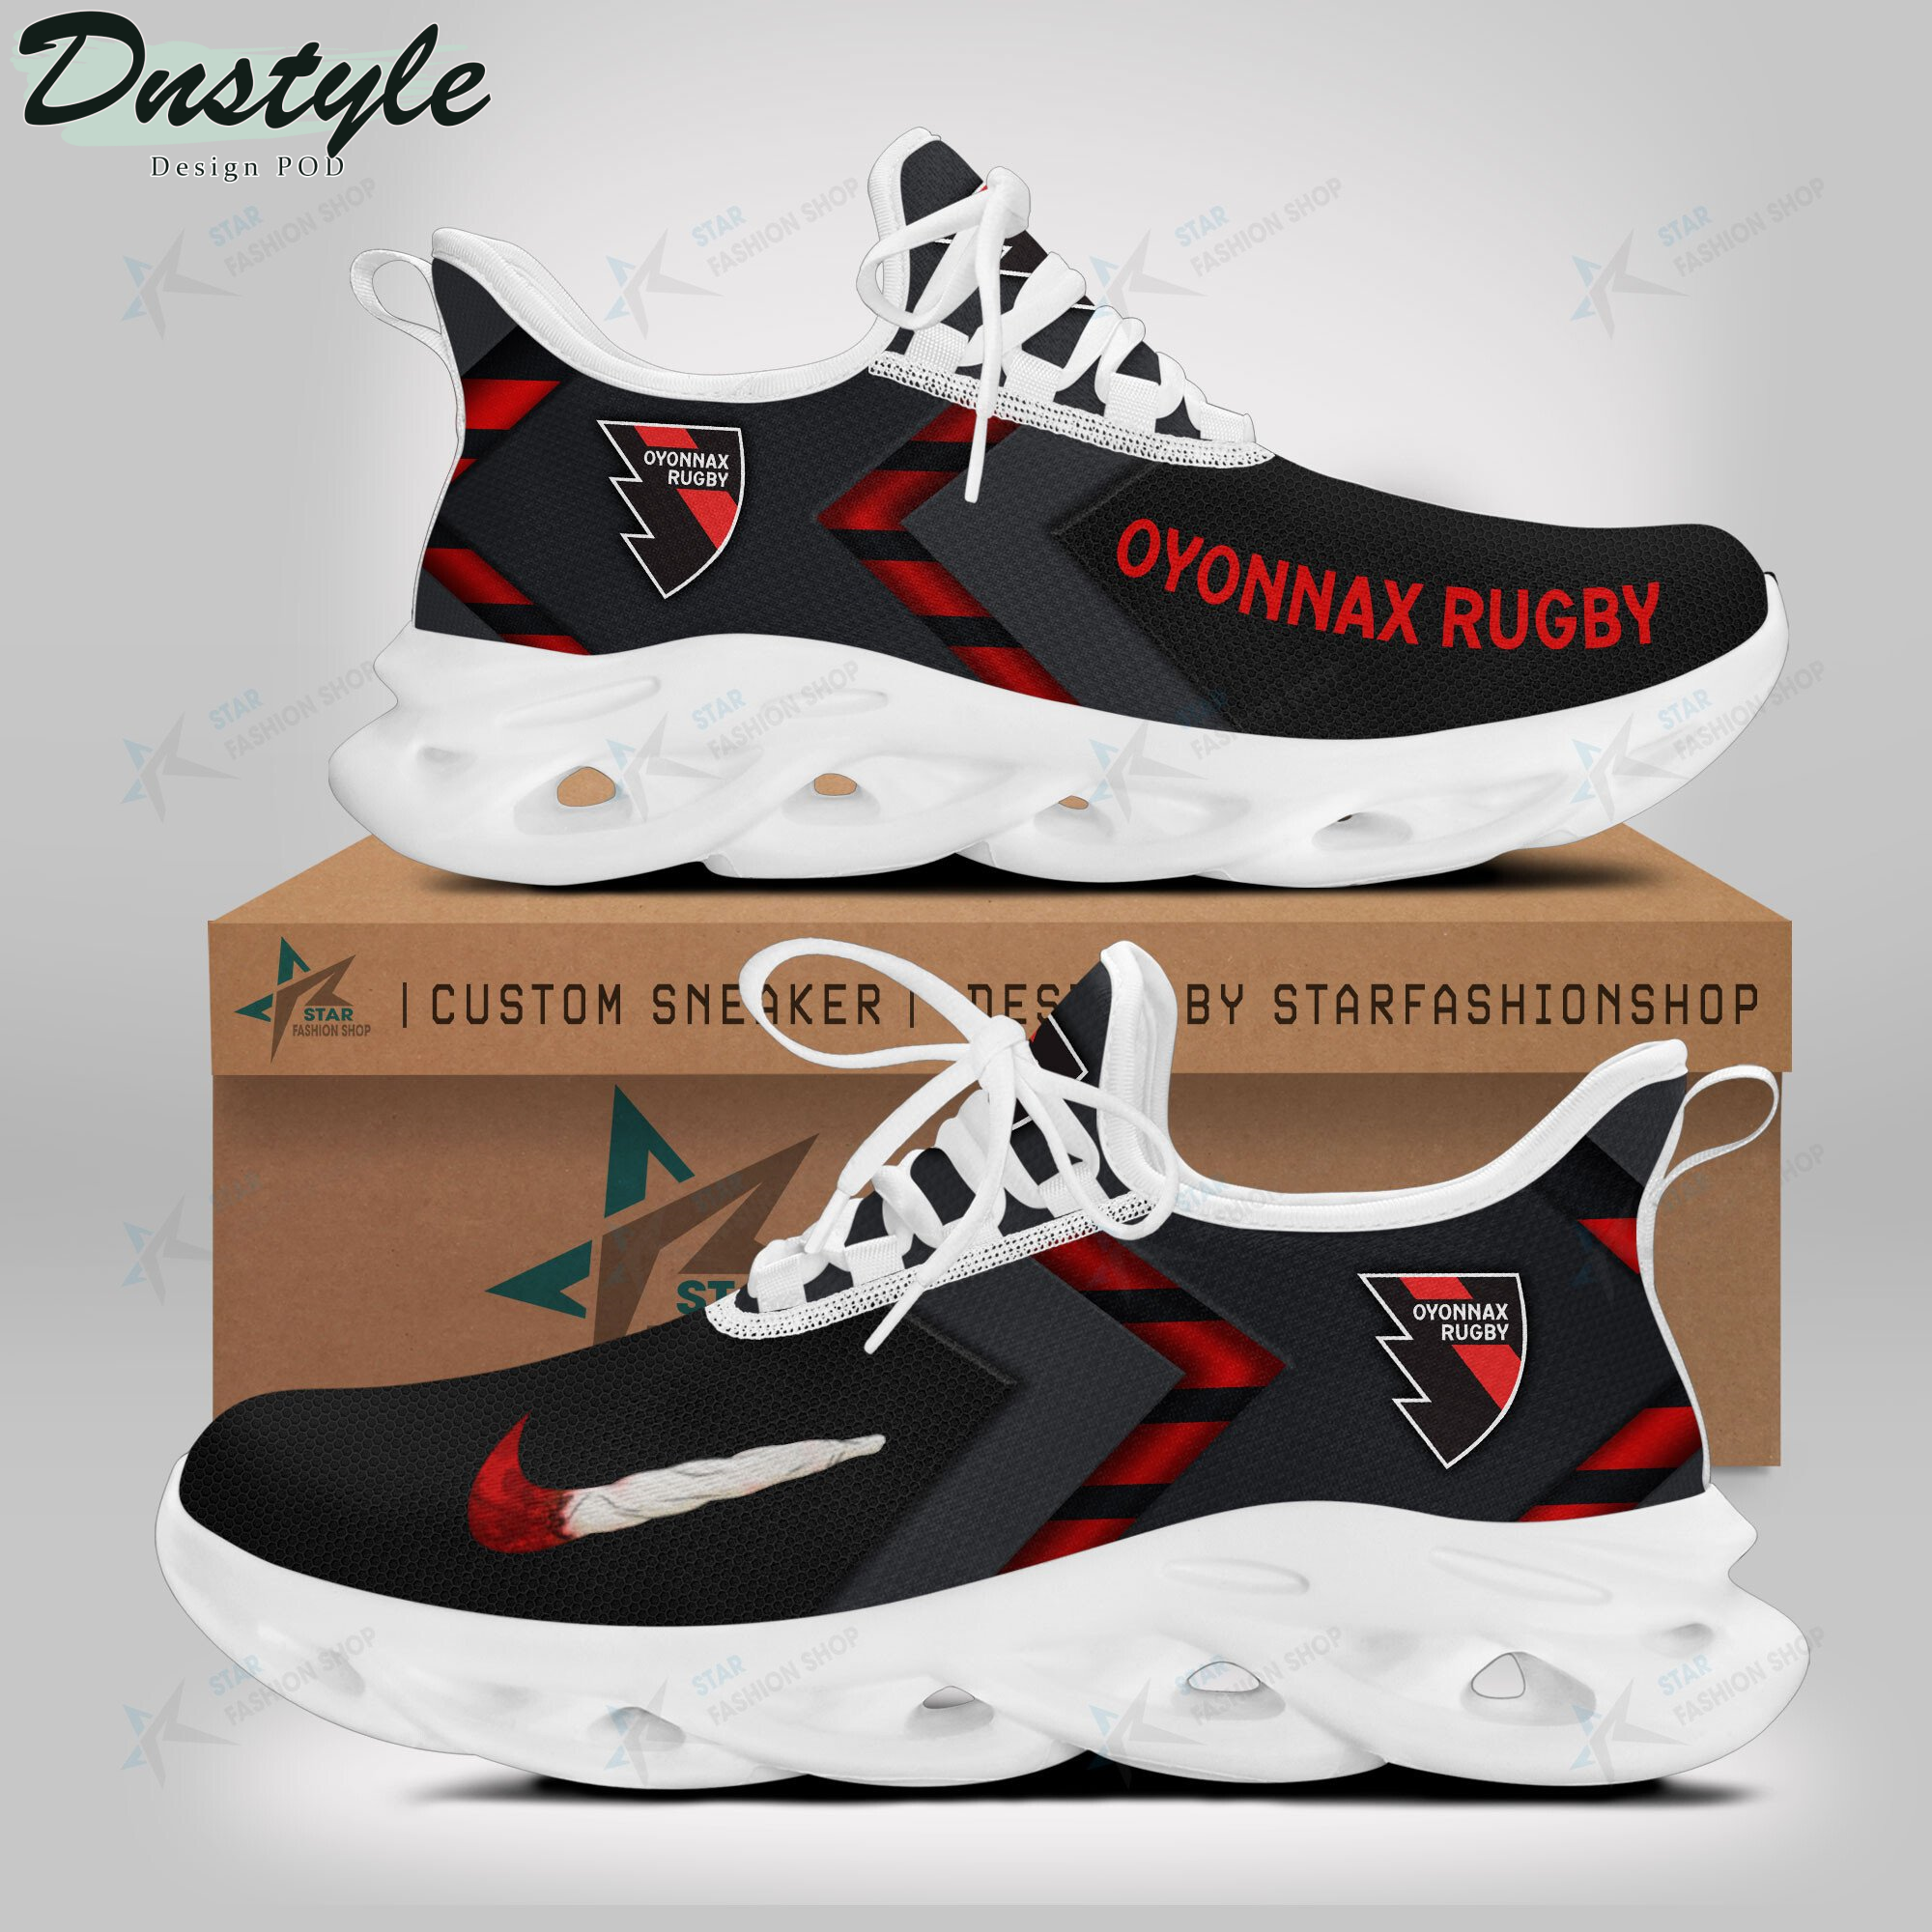 Oyonnax Rugby Clunky Sneakers Shoes